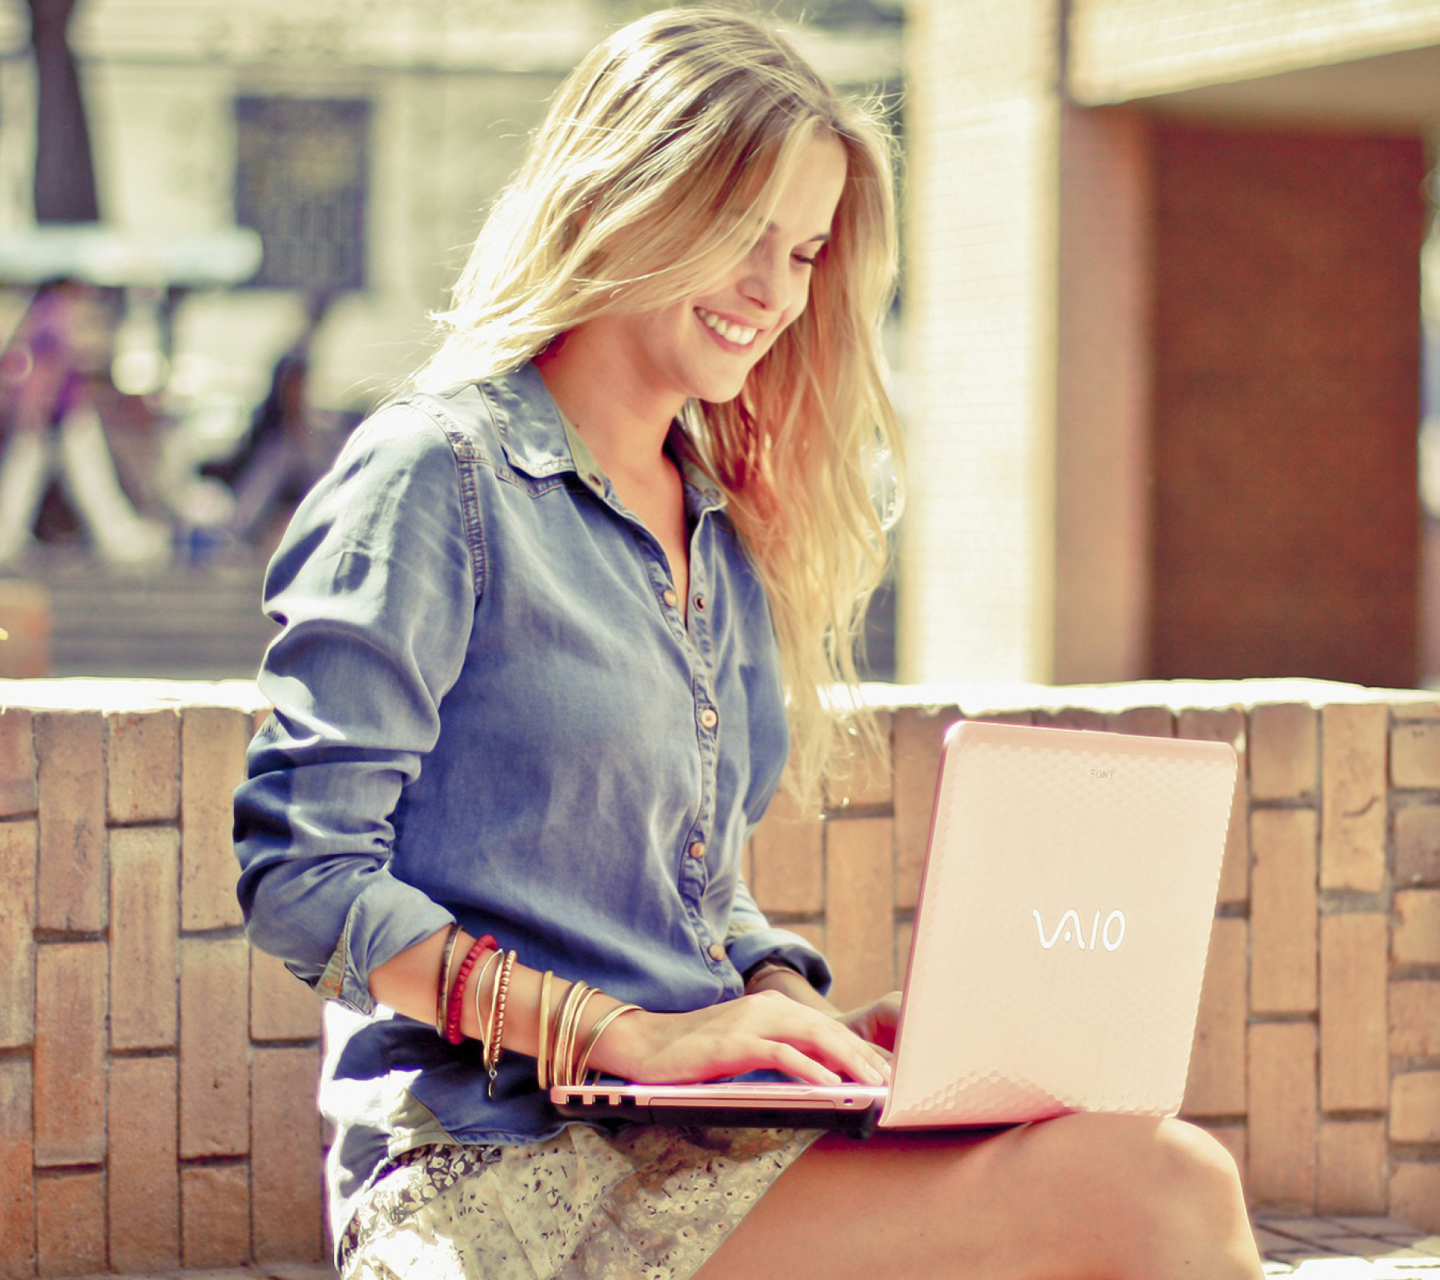 Girl With Laptop wallpaper 1440x1280